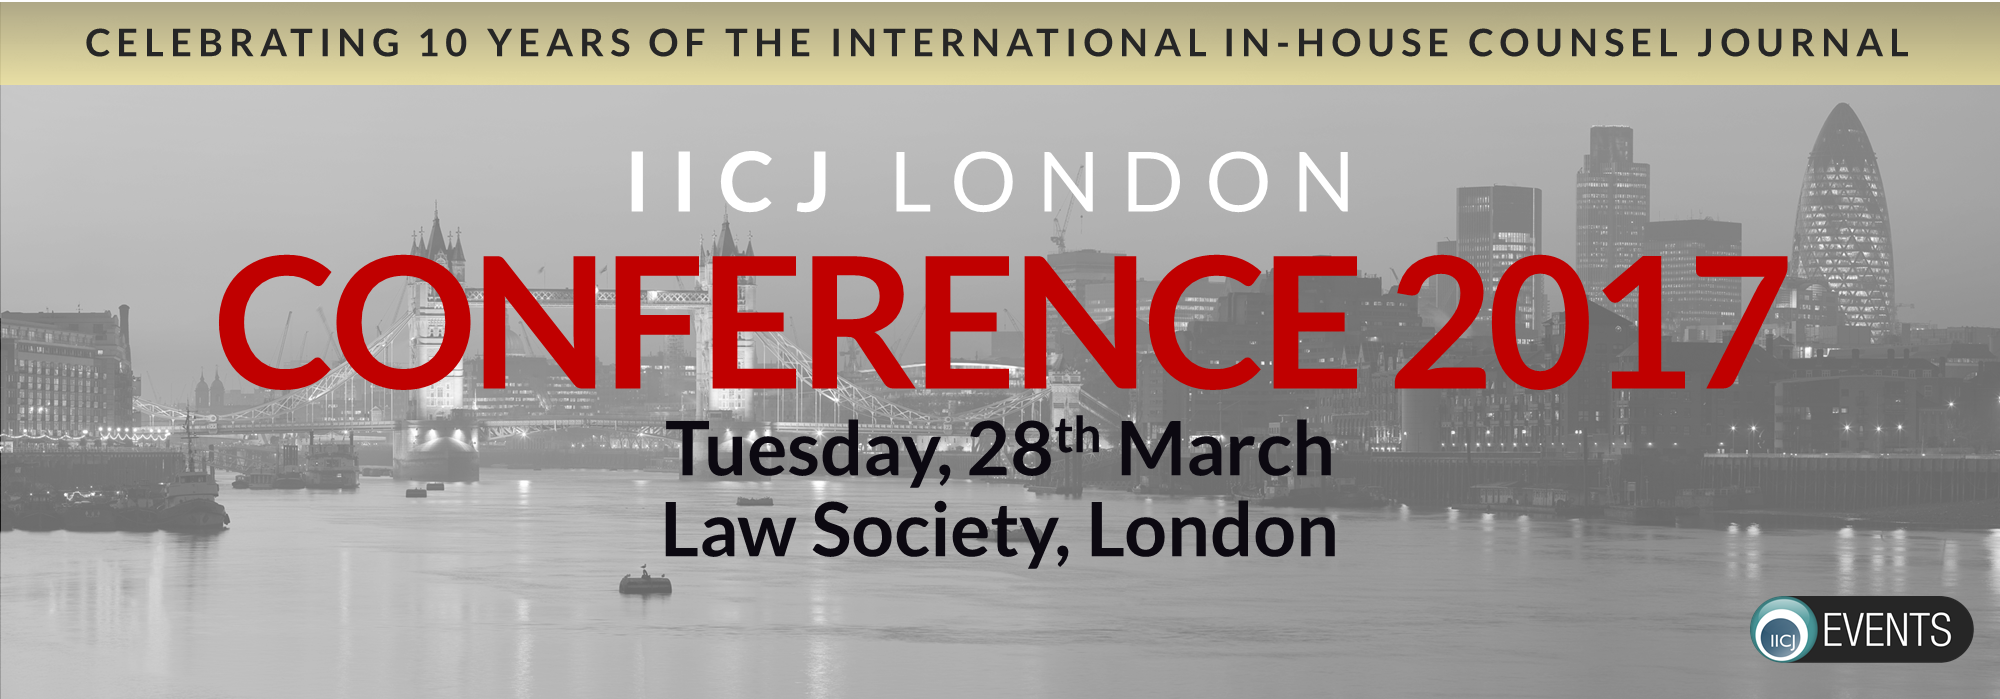 London Conference 2017